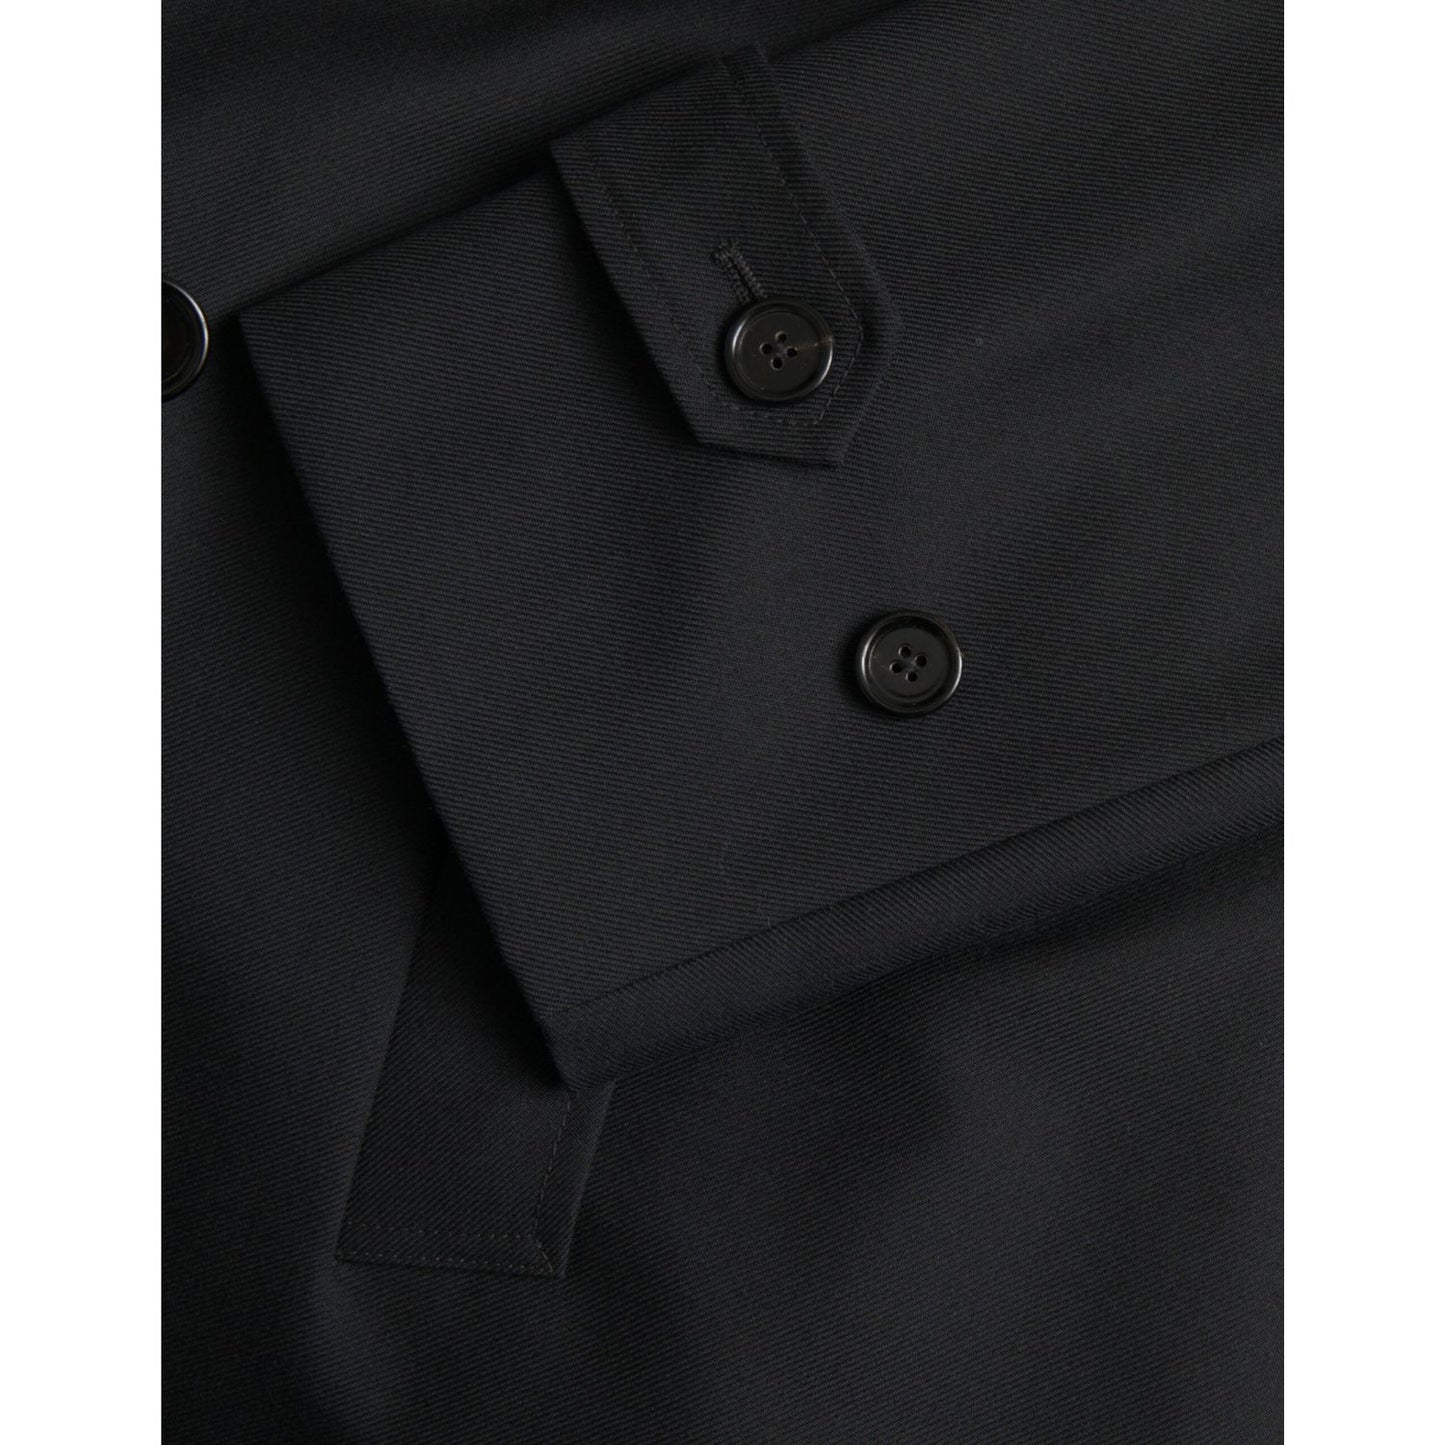 Dolce & Gabbana Black Double Breasted Trench Coat Jacket black-double-breasted-trench-coat-jacket